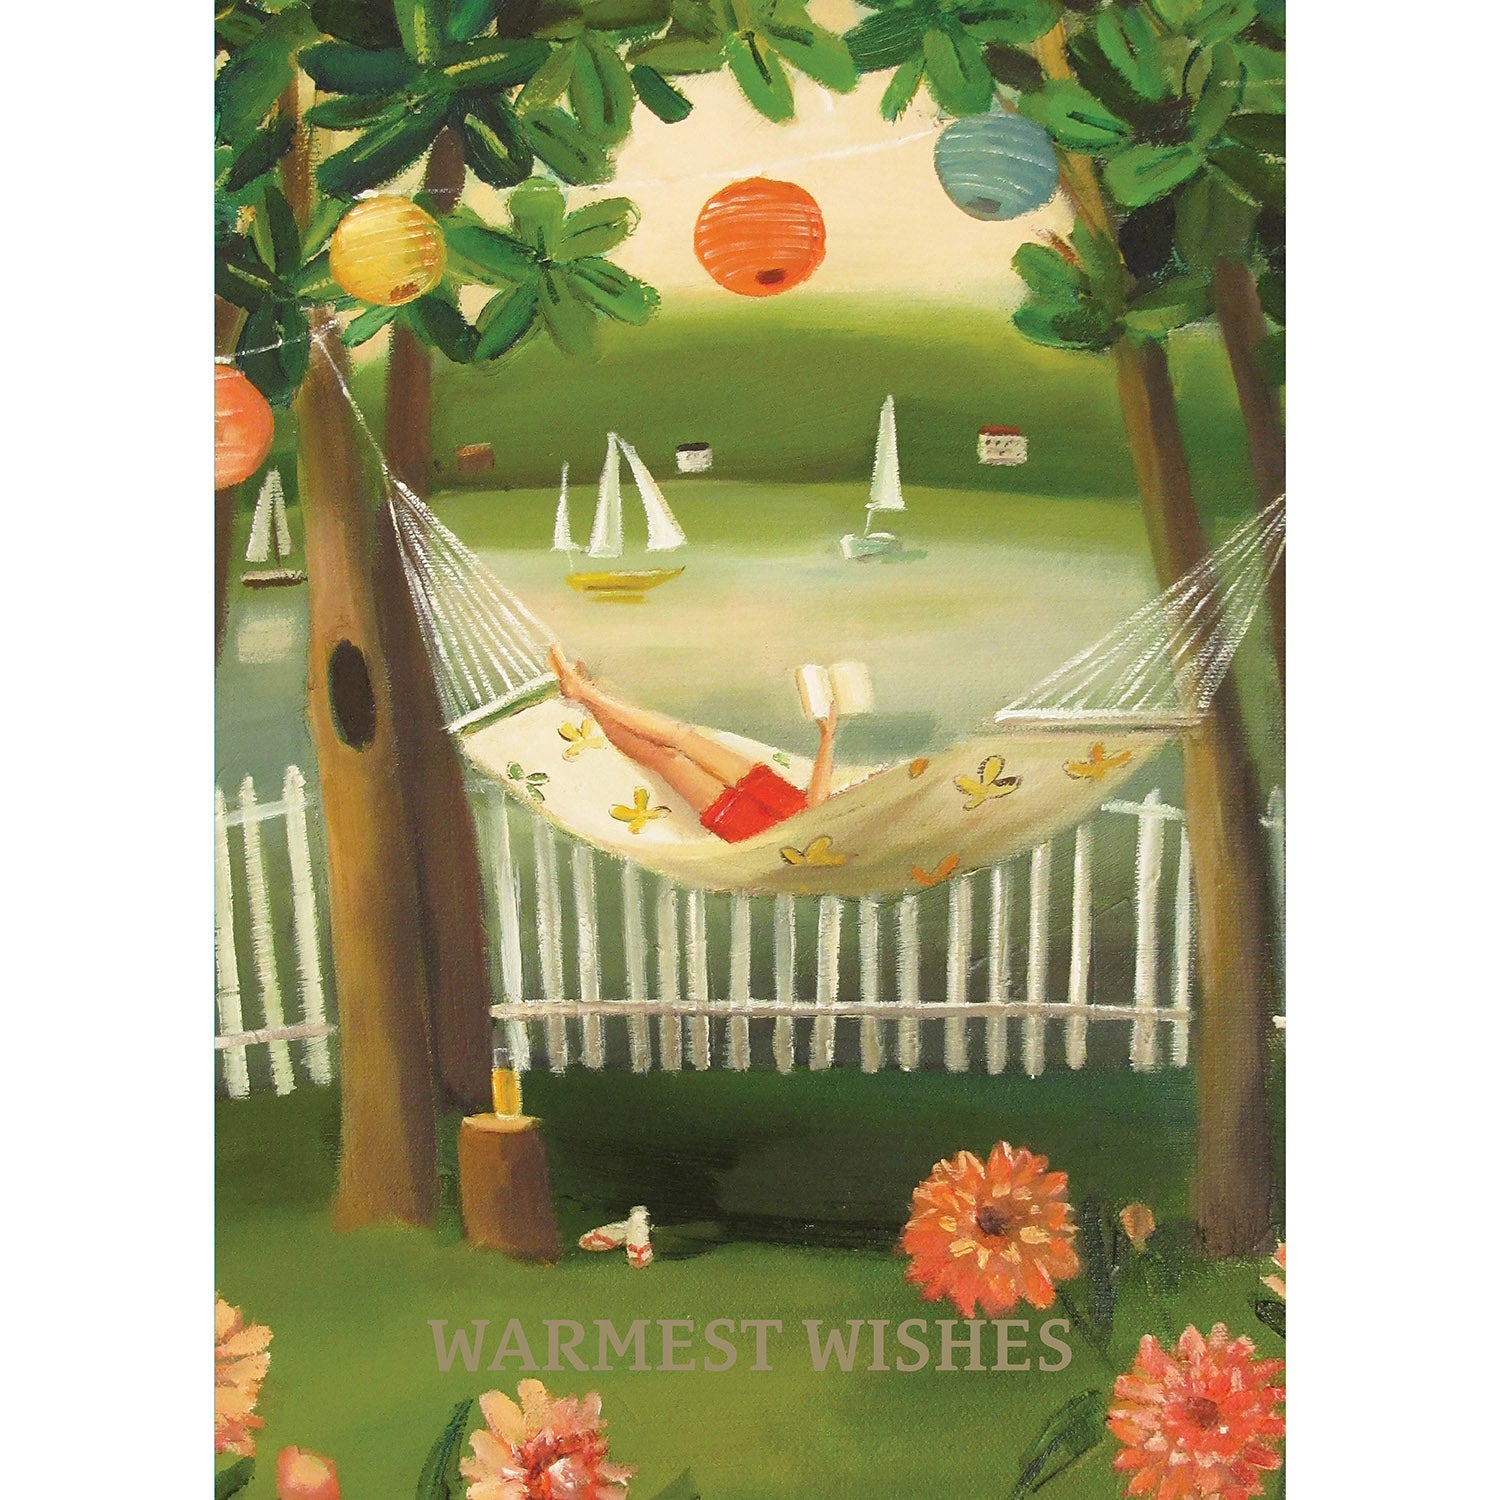 A painterly illustration of a relaxing outdoor summer scene featuring a person reading a book in a hammock with sailboats on a lake in the background.